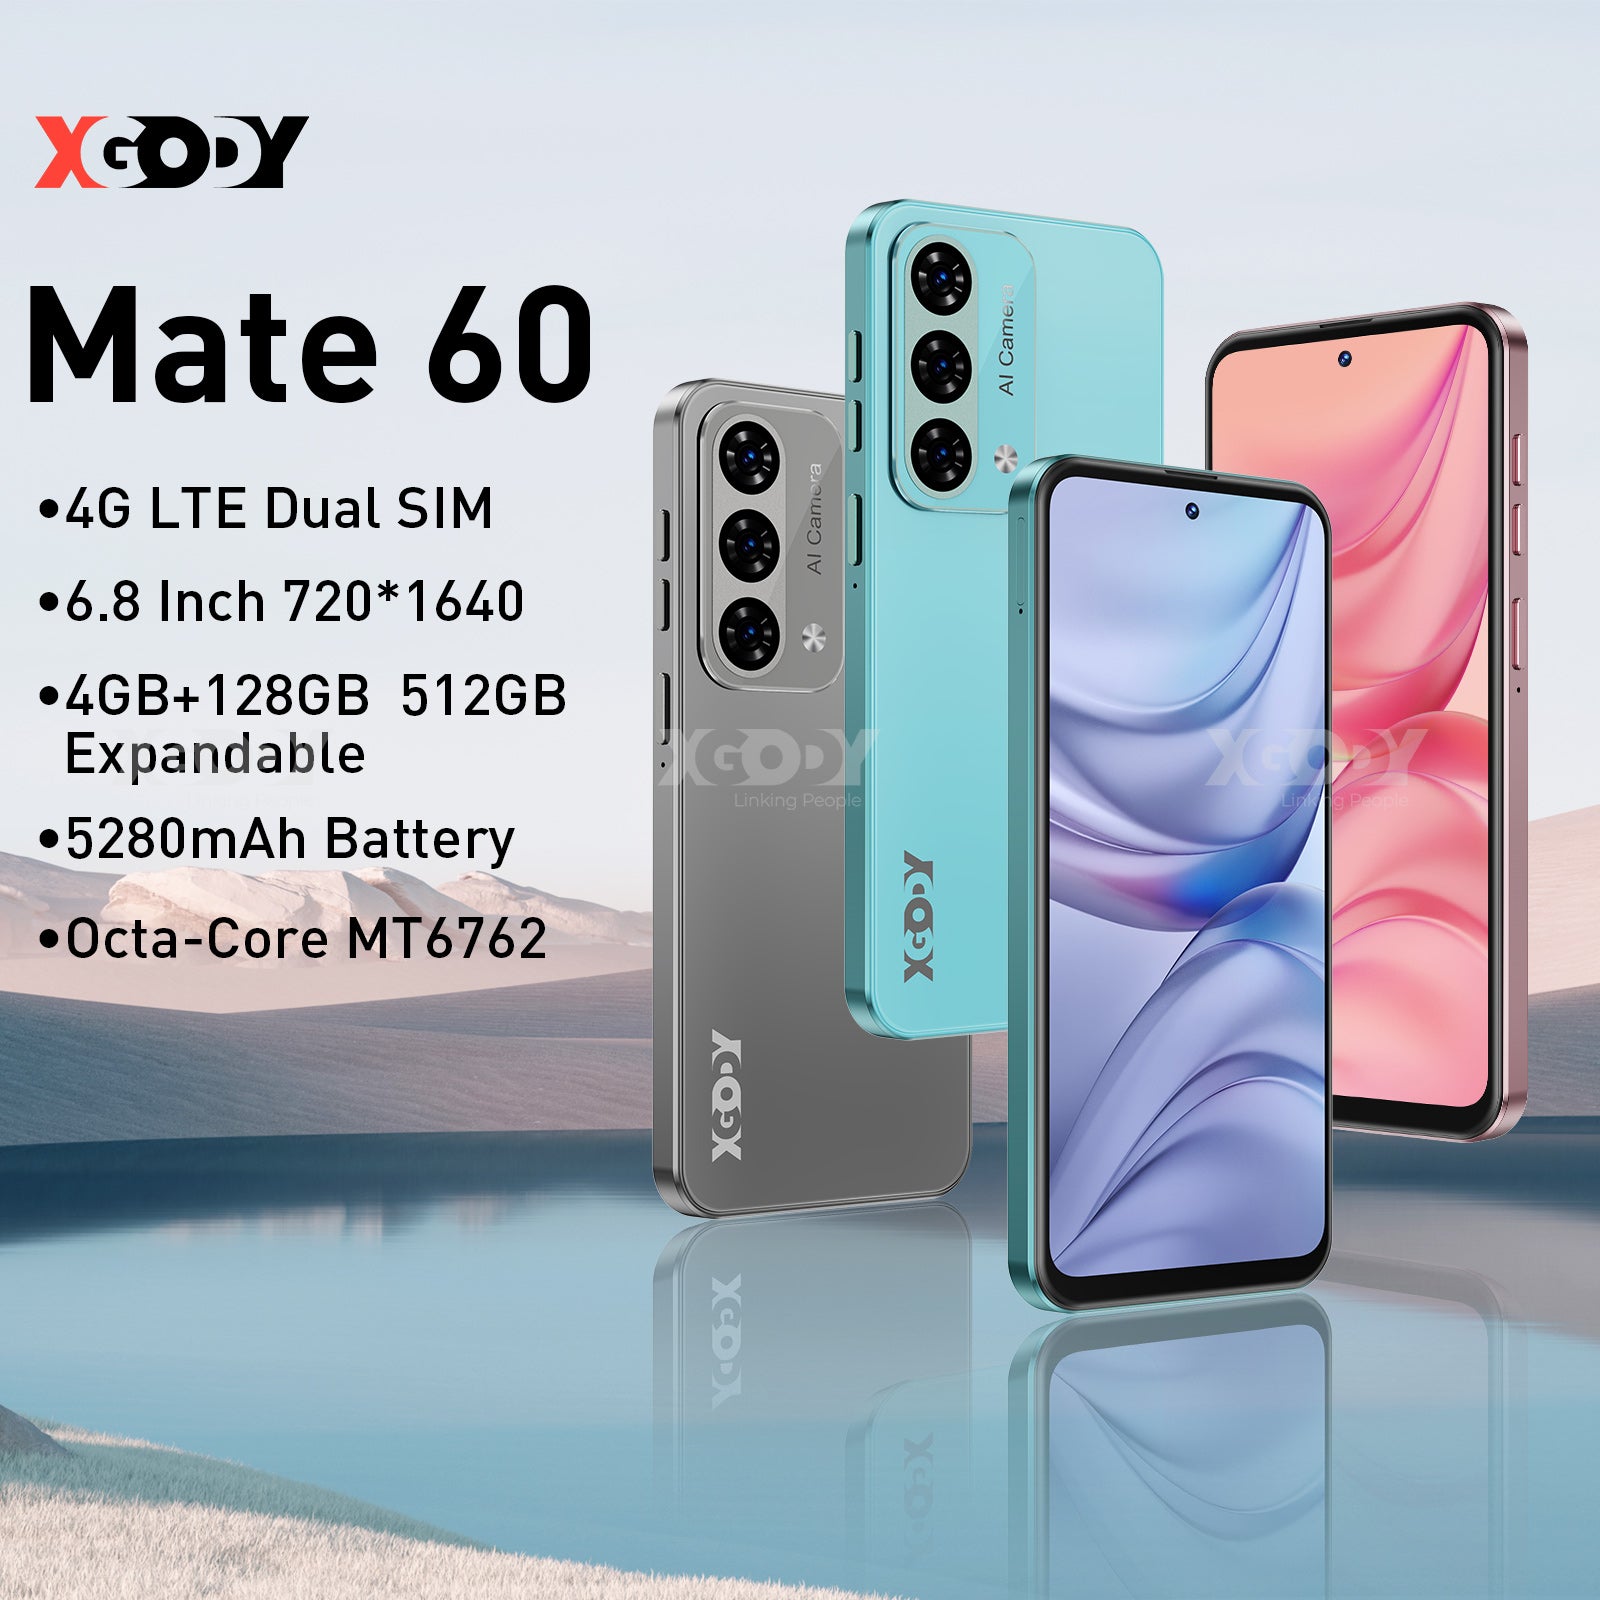 XGODY Mate60 6.79" Large Screen 4G LTE Smartphone, Supports Sace Unlocking, Built-in 4+128G Memory